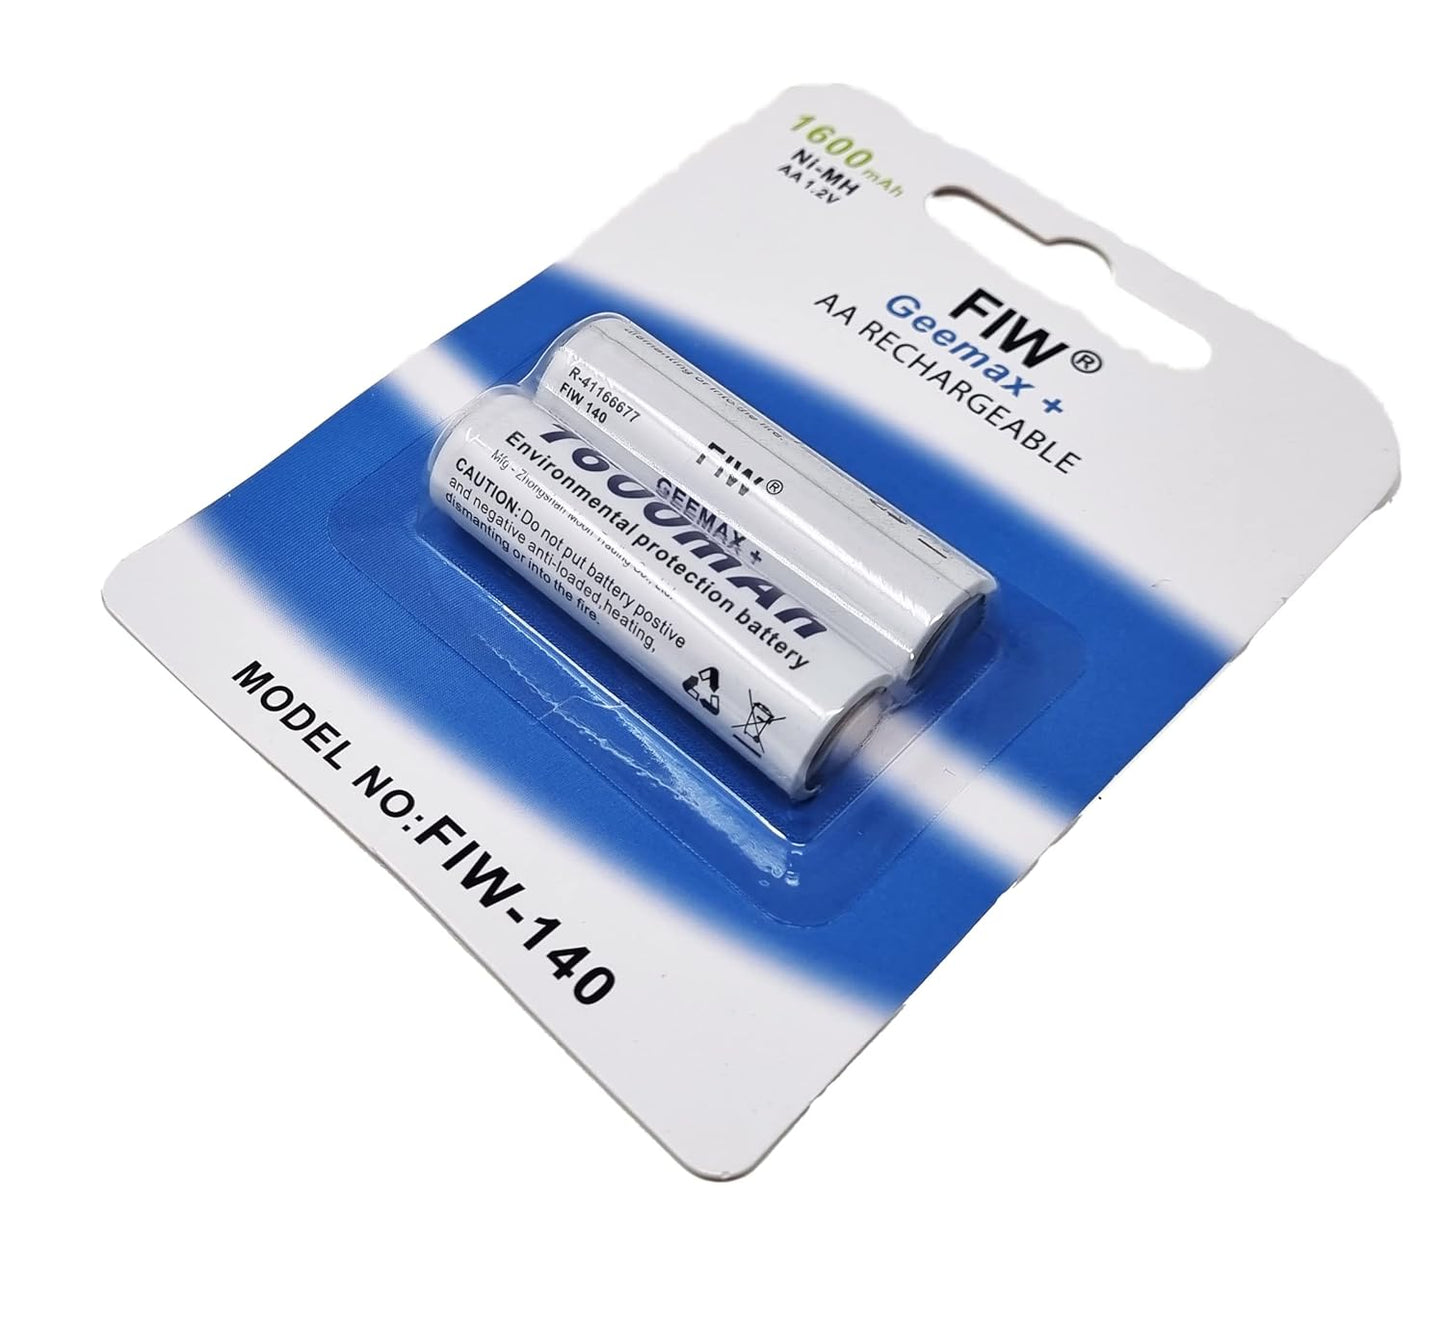 FIW Geemax+ Ni-MH 1.2V Rechargeable Battery (AA Battery (1800mAh))